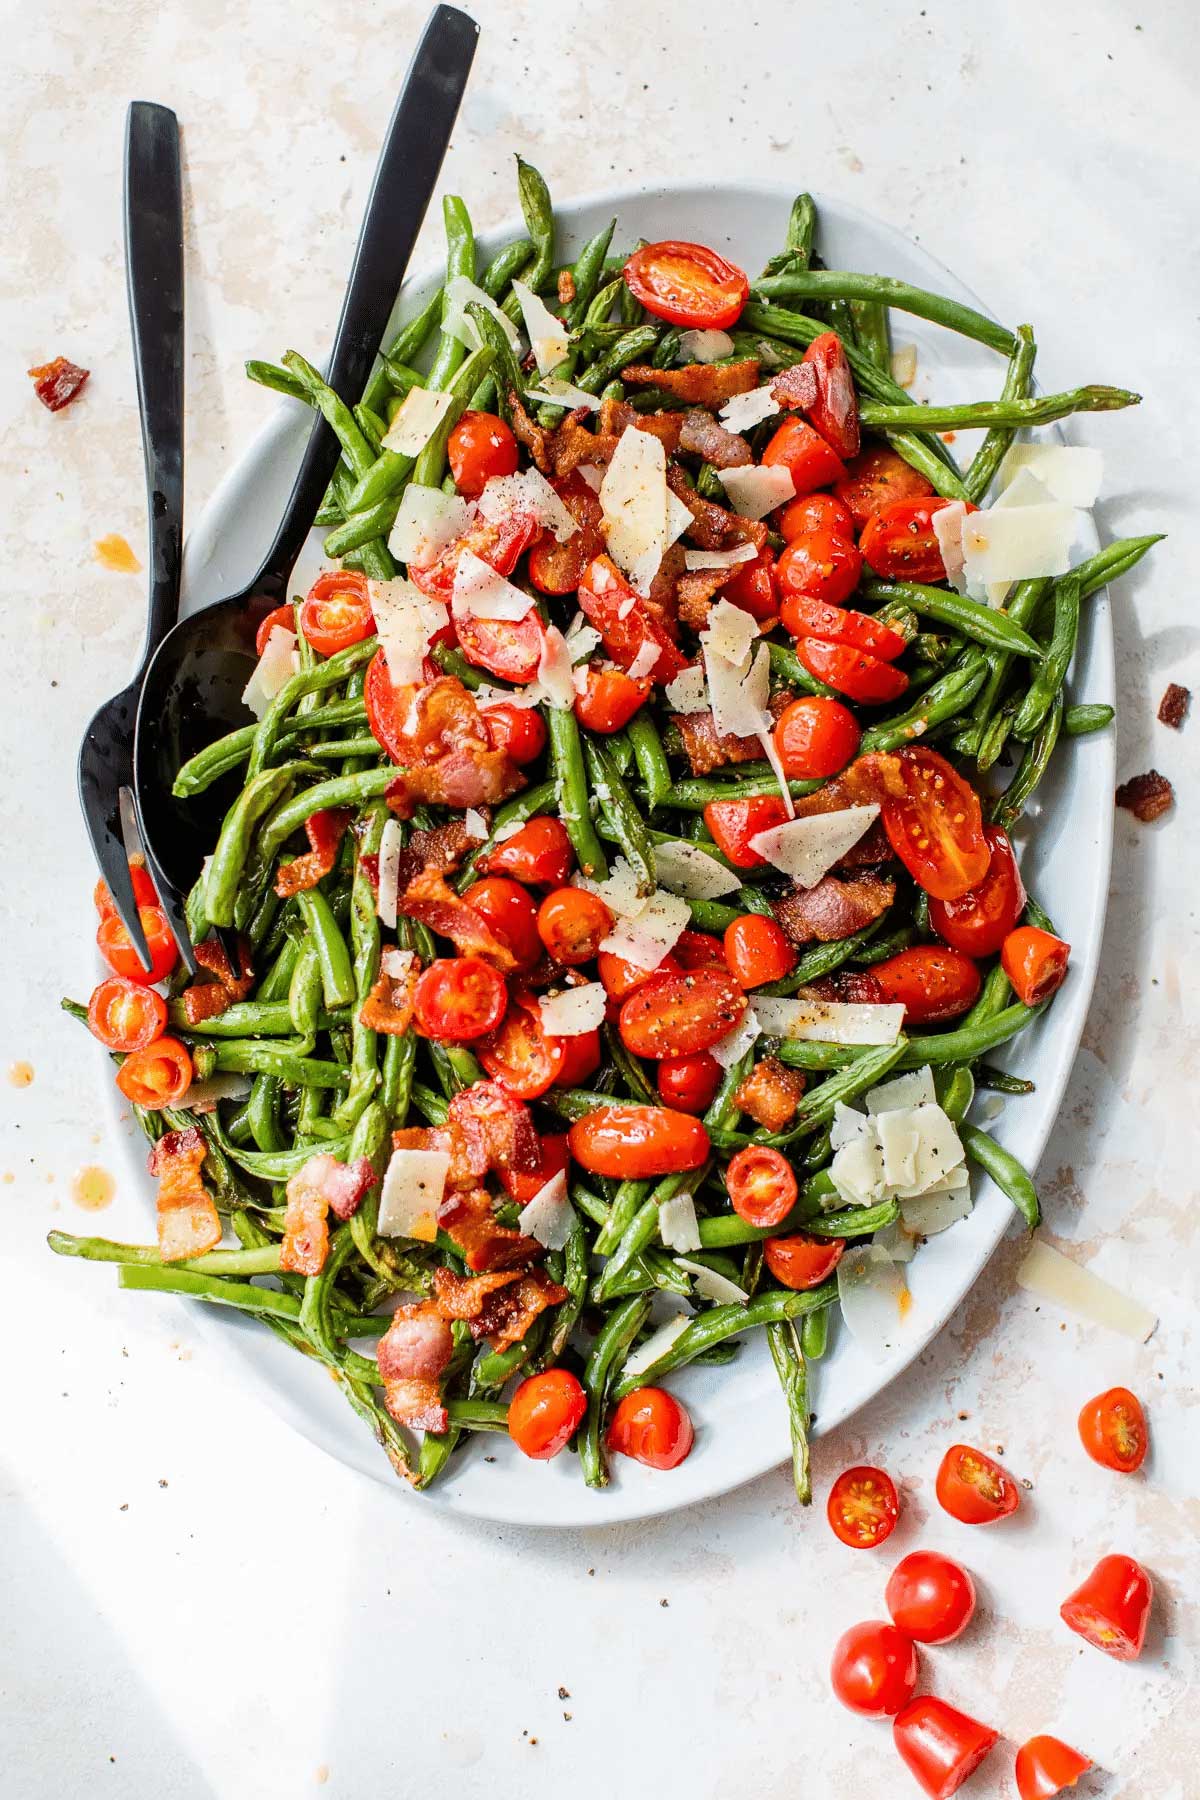 Tomato bacon green bean salad with serving spoon and fork.